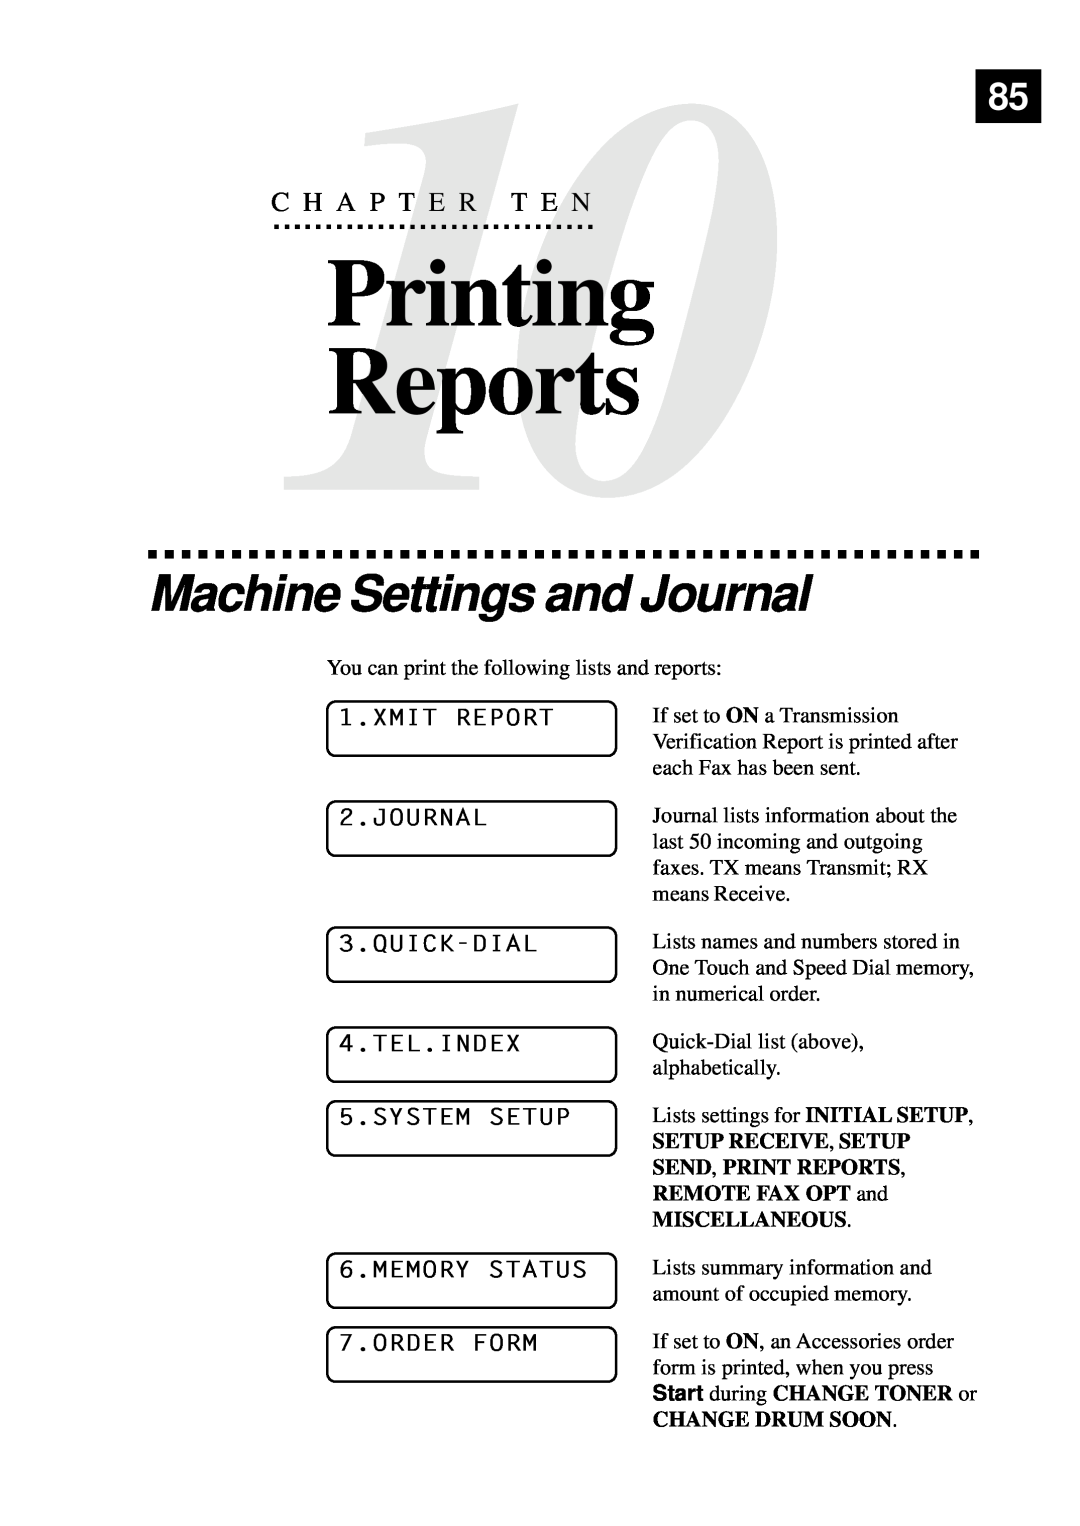 Brother MFC-9650 Printing Reports, Machine Settings and Journal, C10H A P T E R T E N85, MEMORY STATUS 7.ORDER FORM 